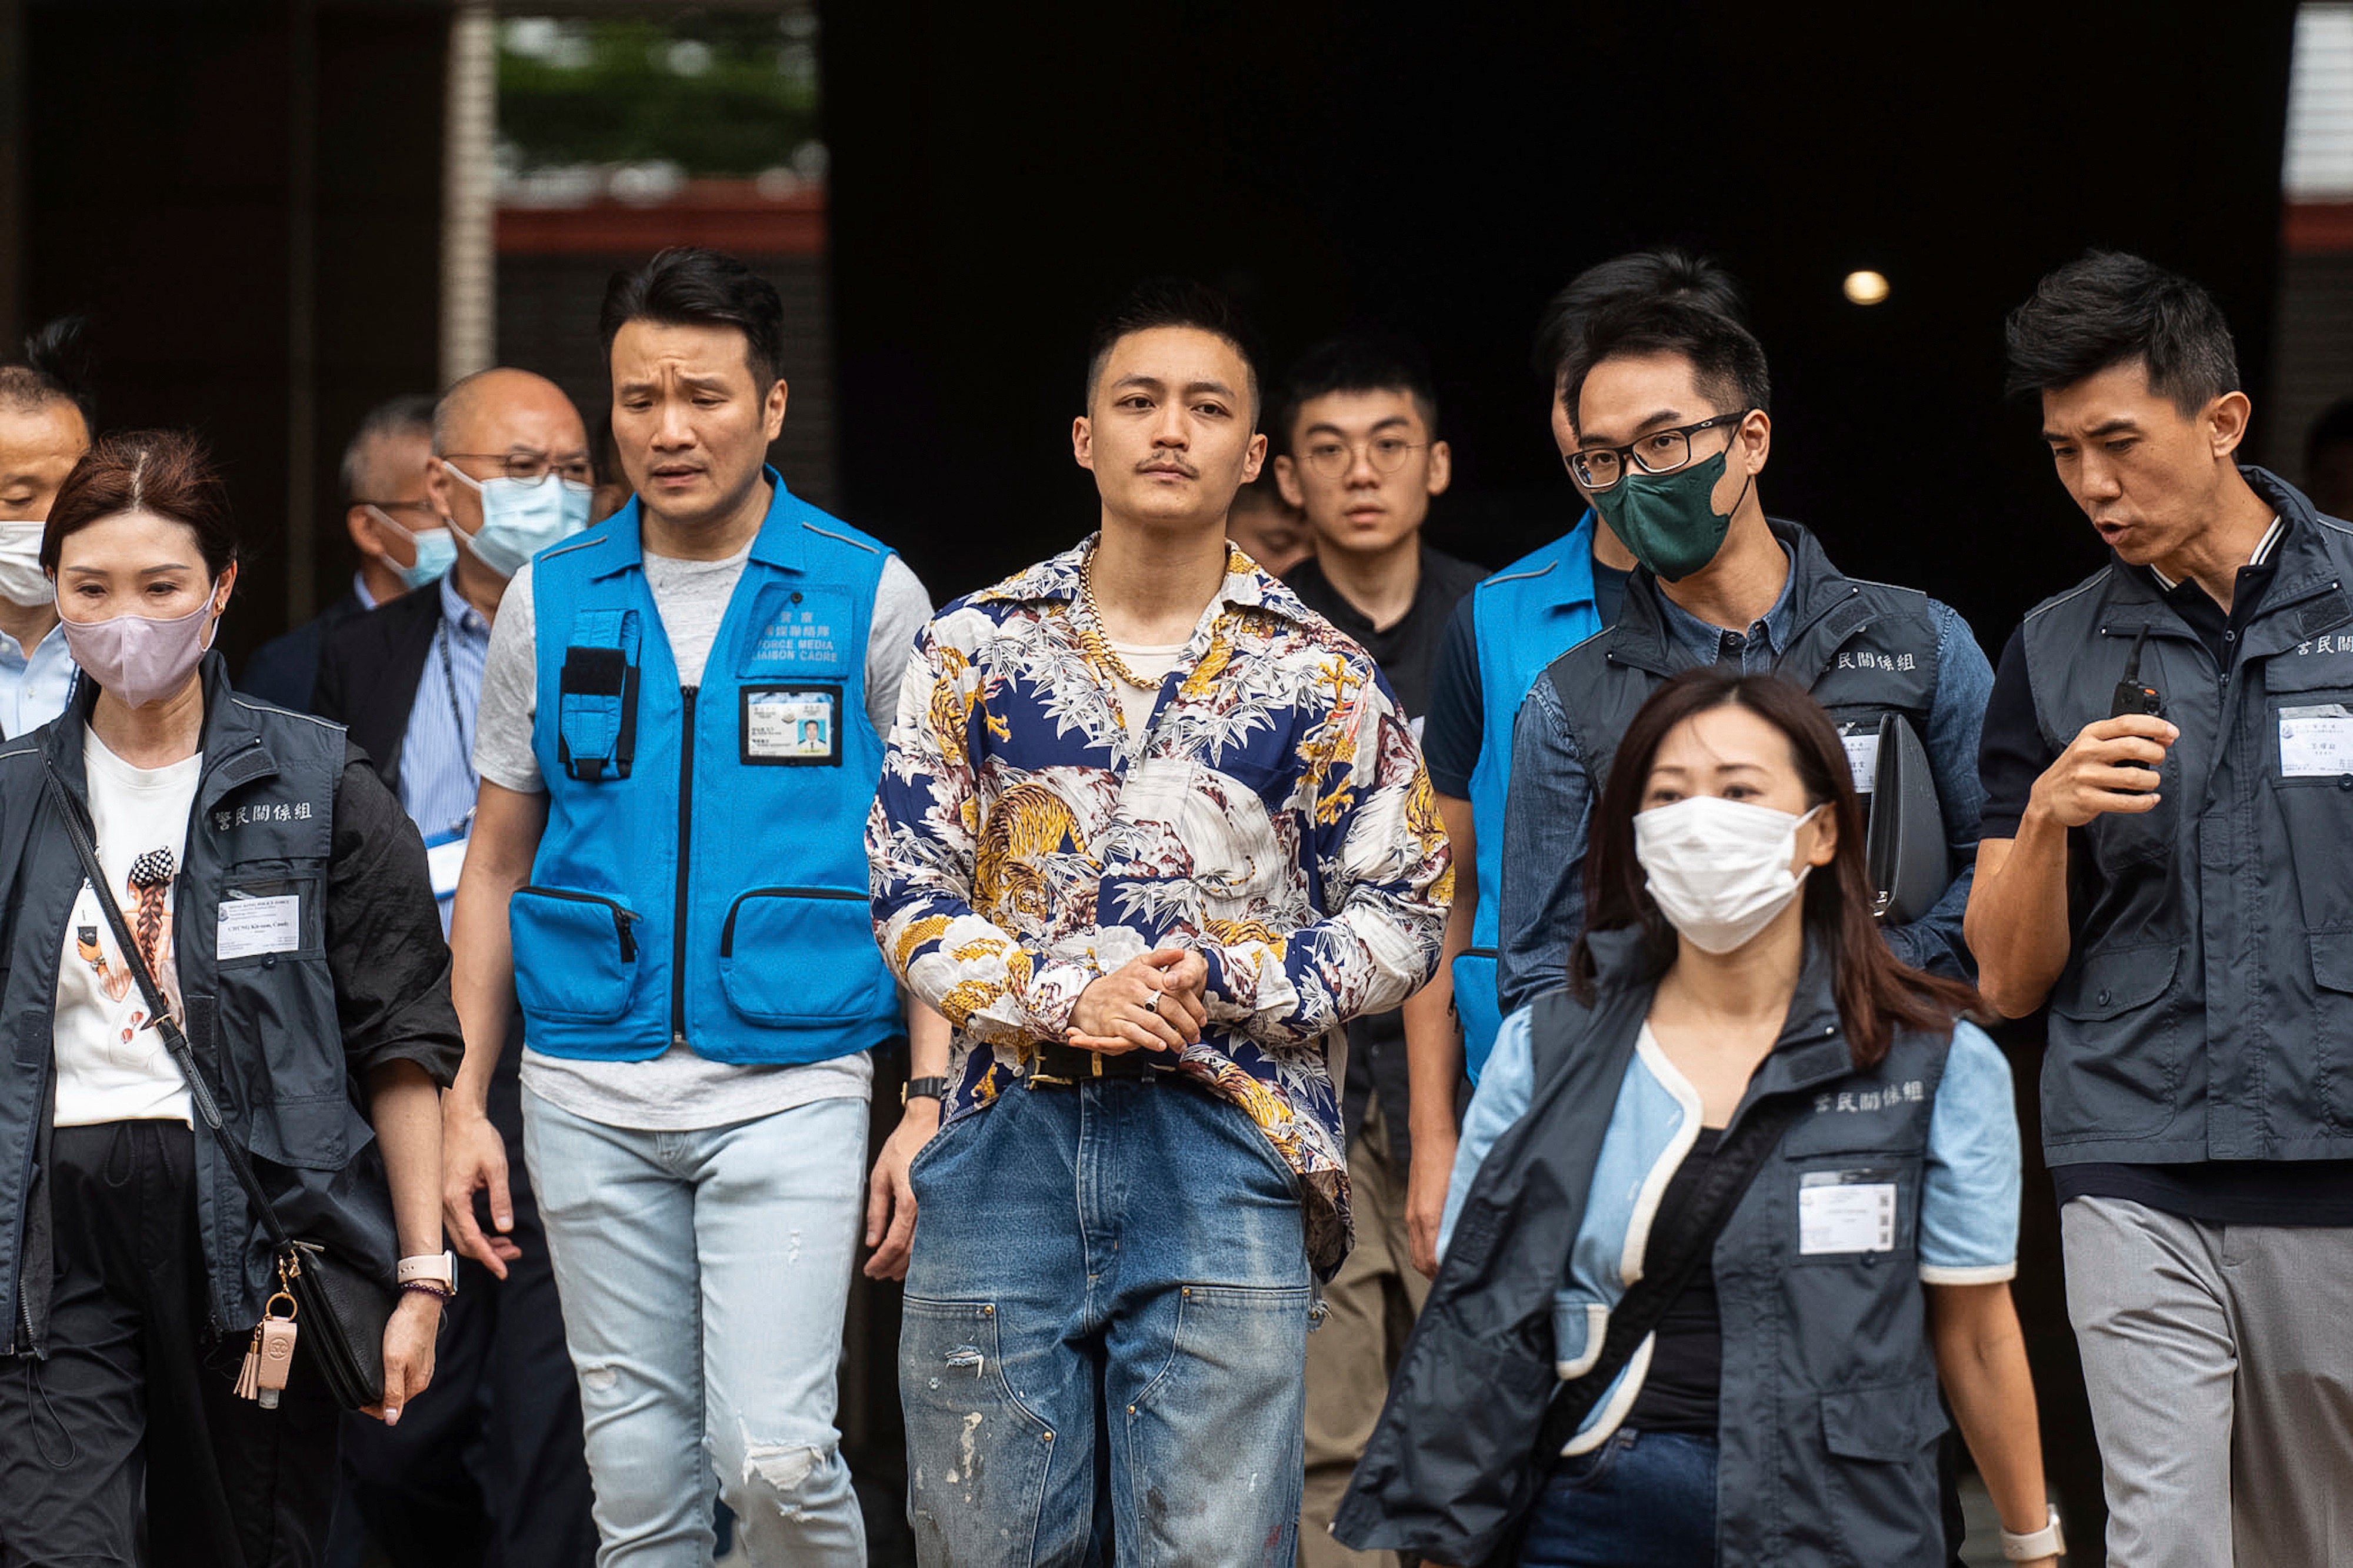 Lee Yue-shun, a former district councillor, leaves the West Kowloon Magistrates’ Courts after being acquitted of subversion on May 30. Photo: AP 